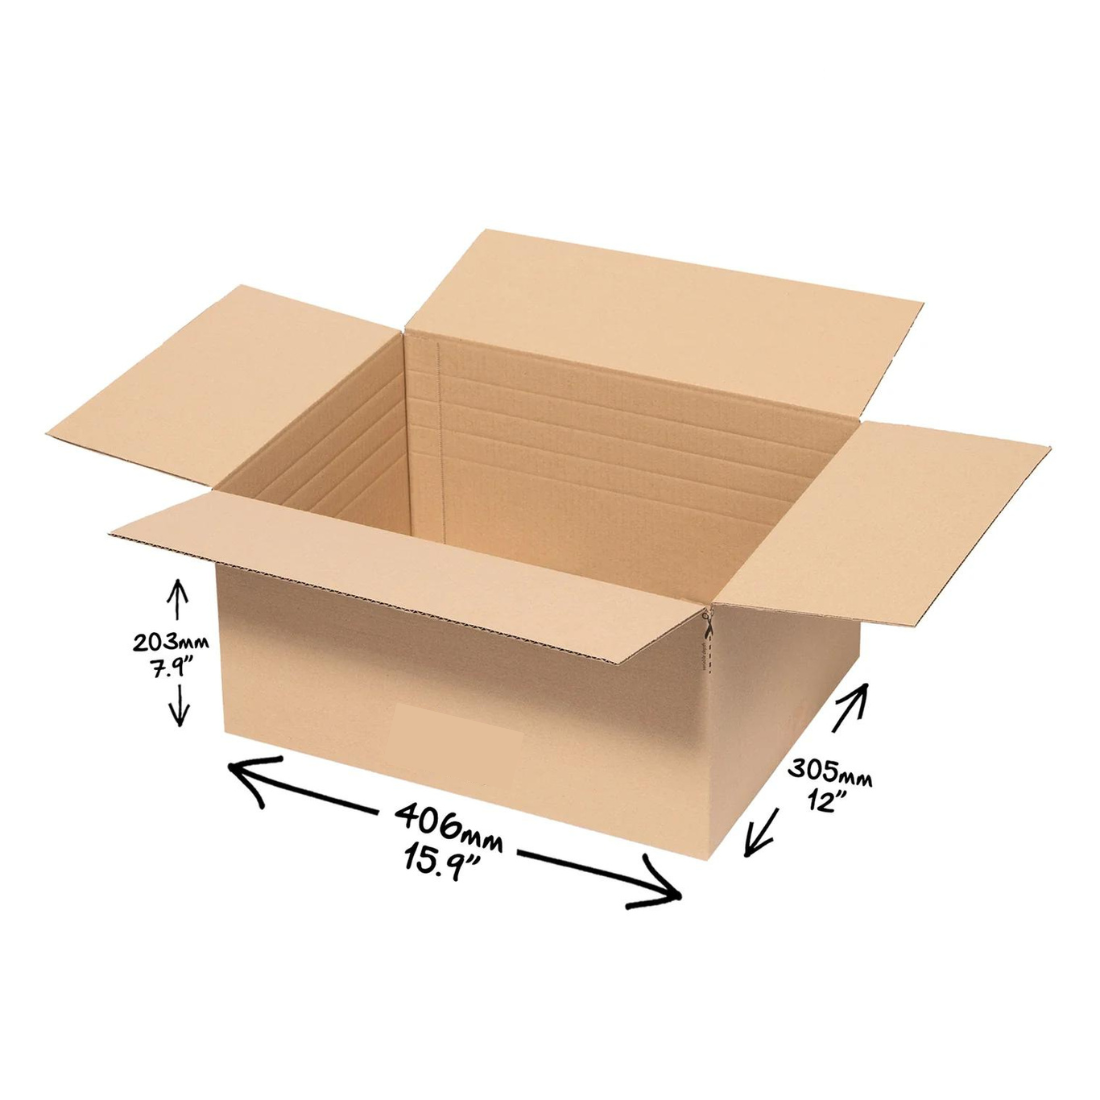 E6 Single Walled Cardboard Box - fits 90% of all 2 slice toasters, juicers, Xbox and many other retail items (PACK OF 50)